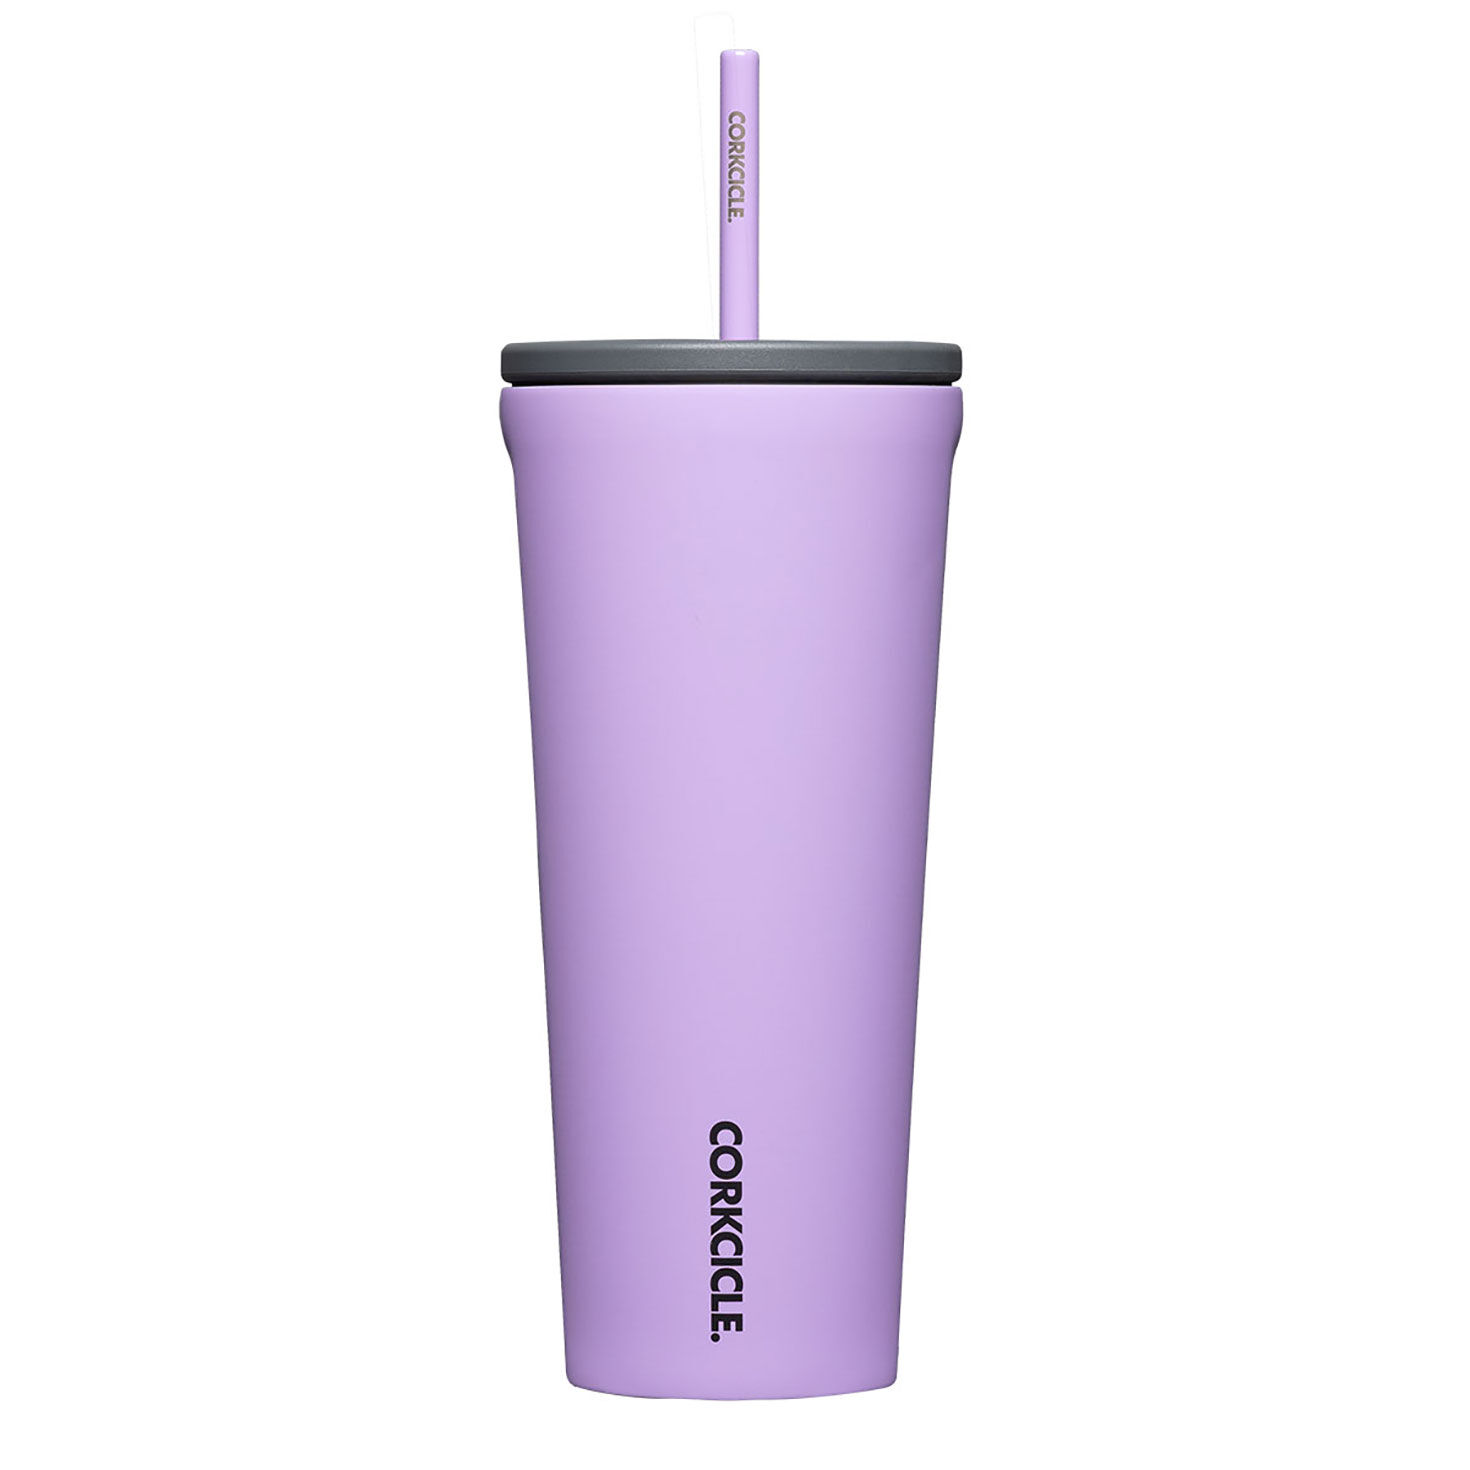 Corkcicle Sun-Soaked Lilac Stainless Steel Tumbler, 24oz